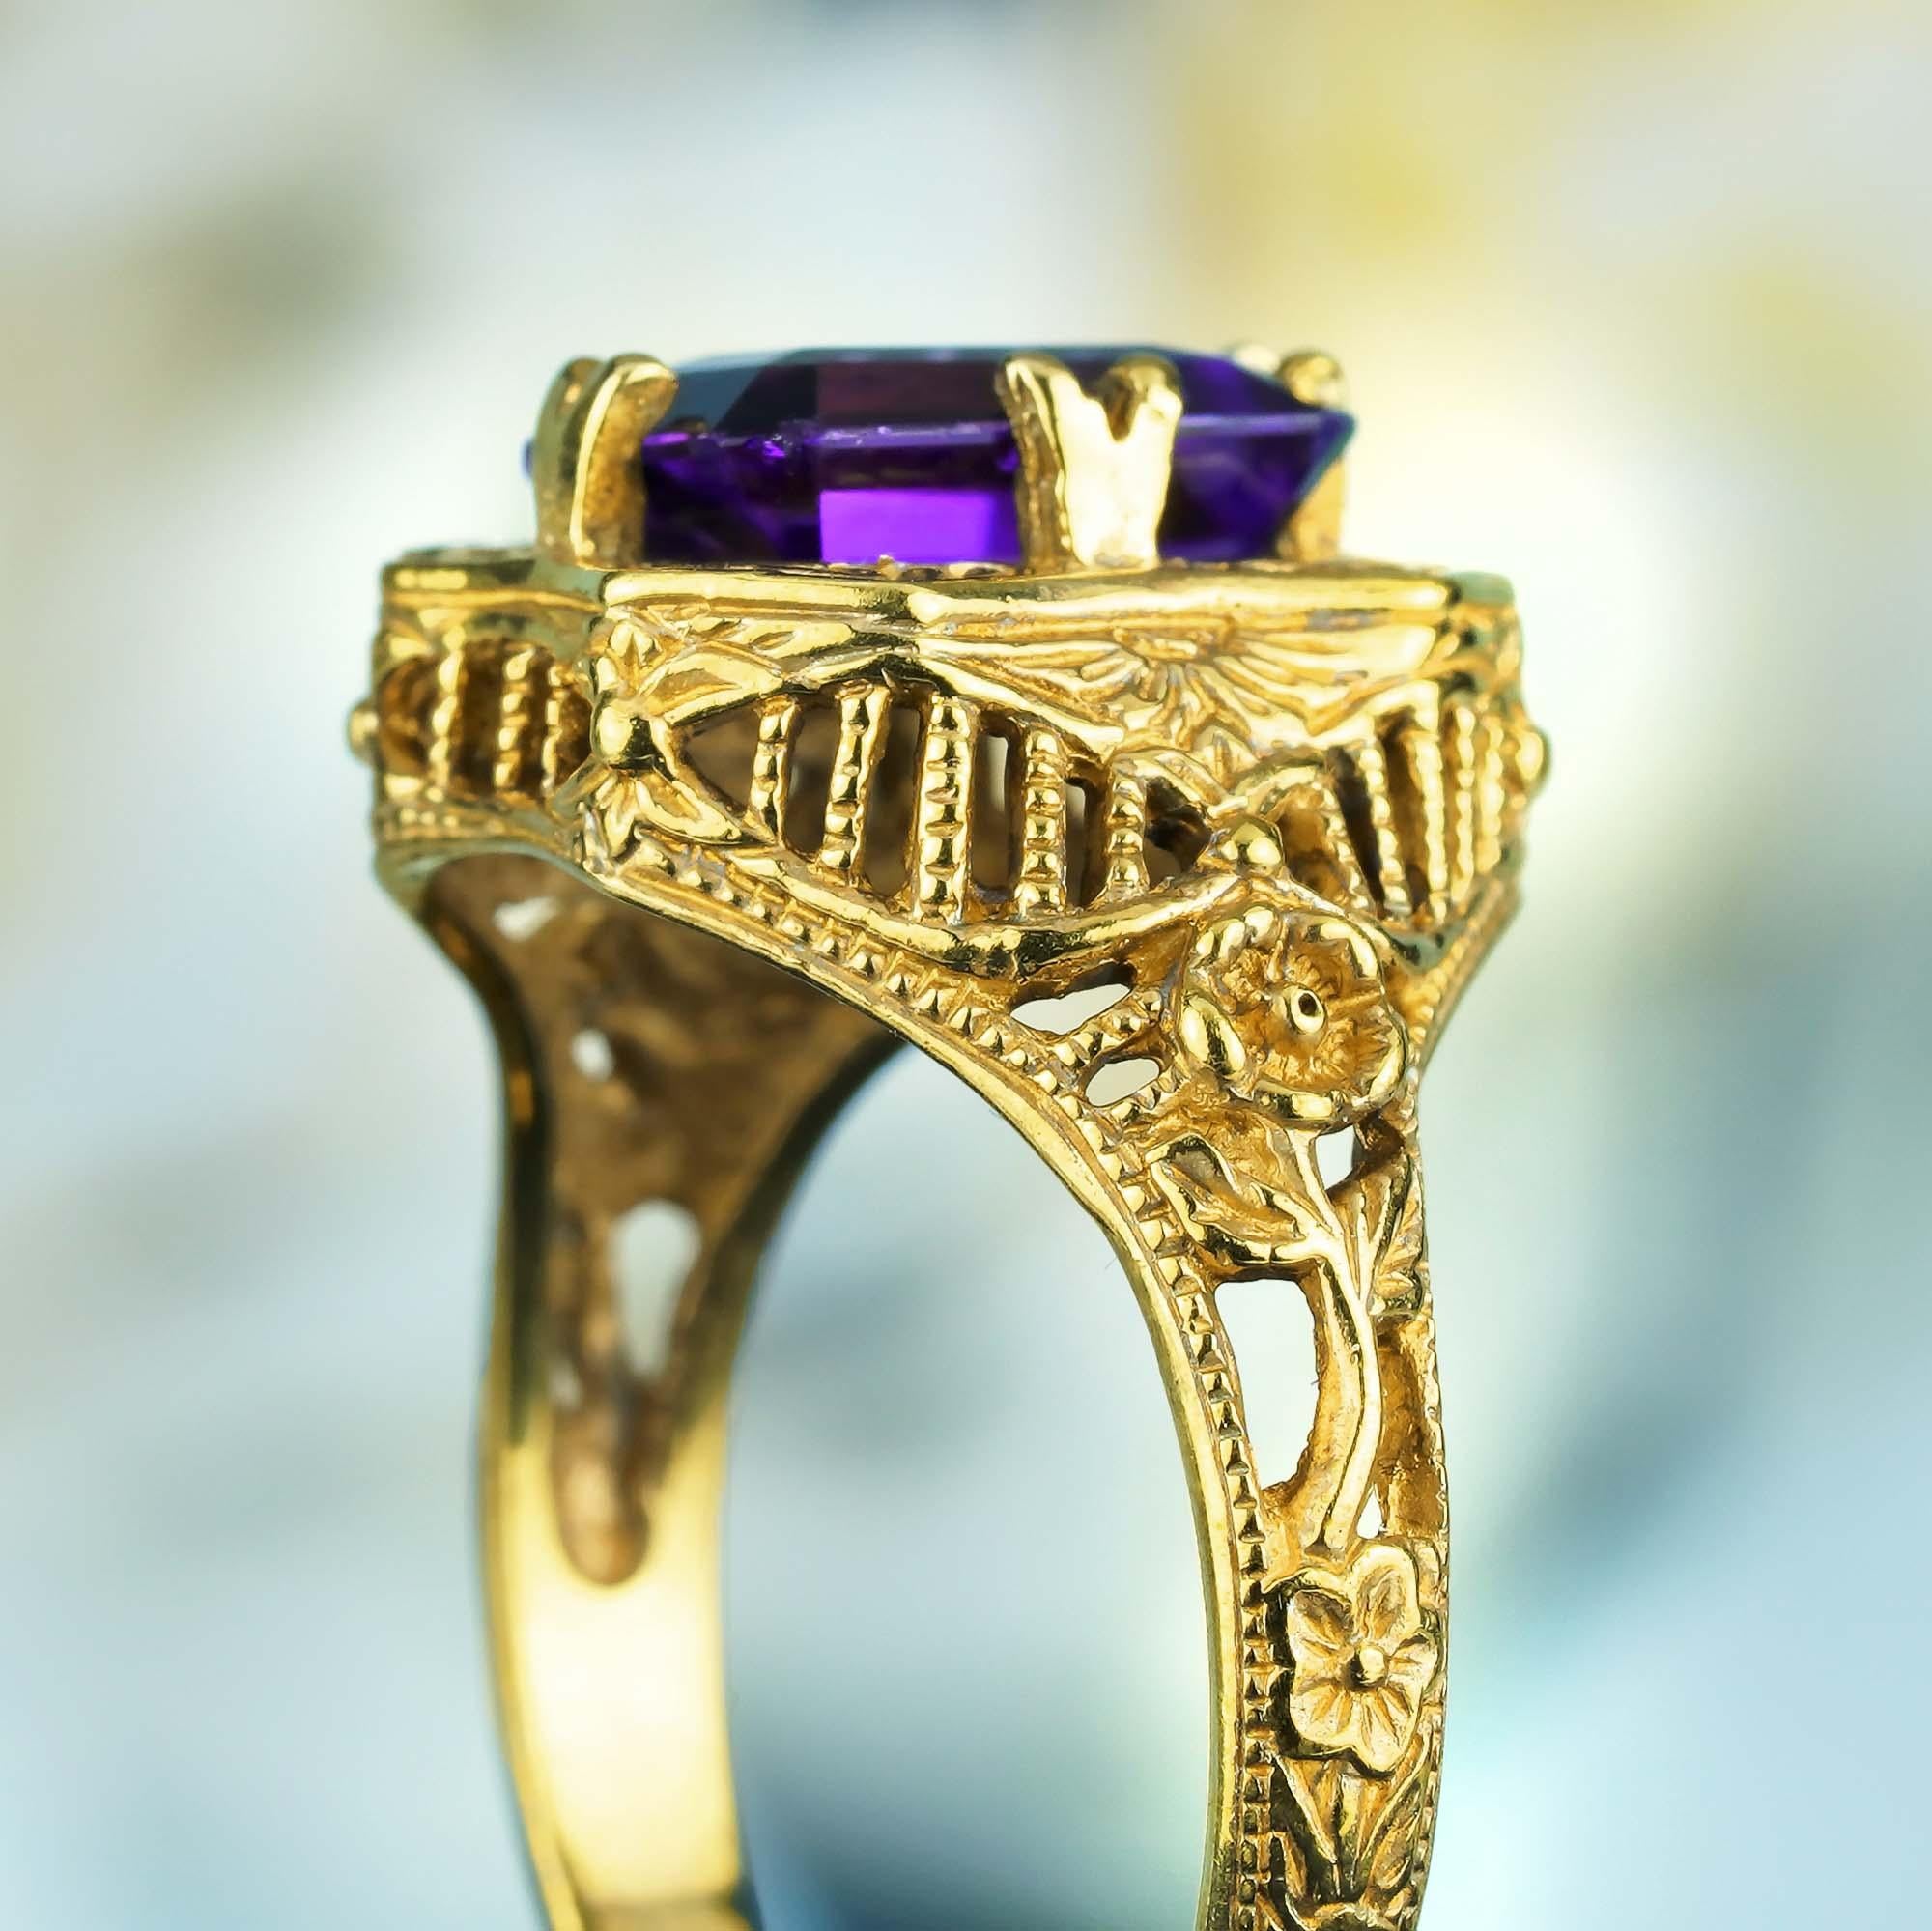 For Sale:  Natural Emerald Cut Amethyst Vintage Style Filigree Ring in Solid 9K Yellow Gold 6